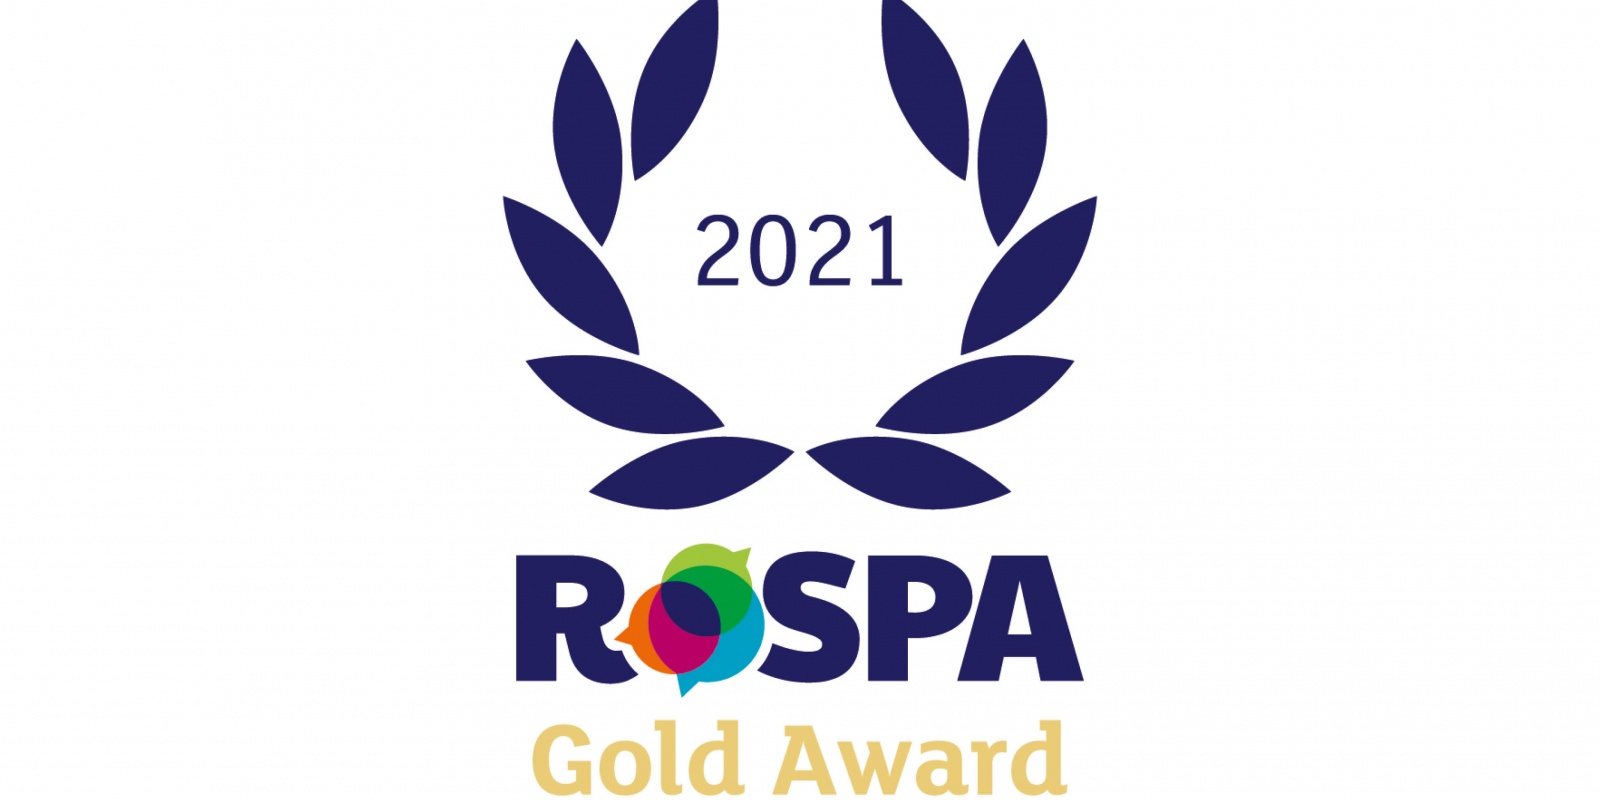 Morrison Data Services Receives RoSPA Gold Award for Health & Safety Achievements